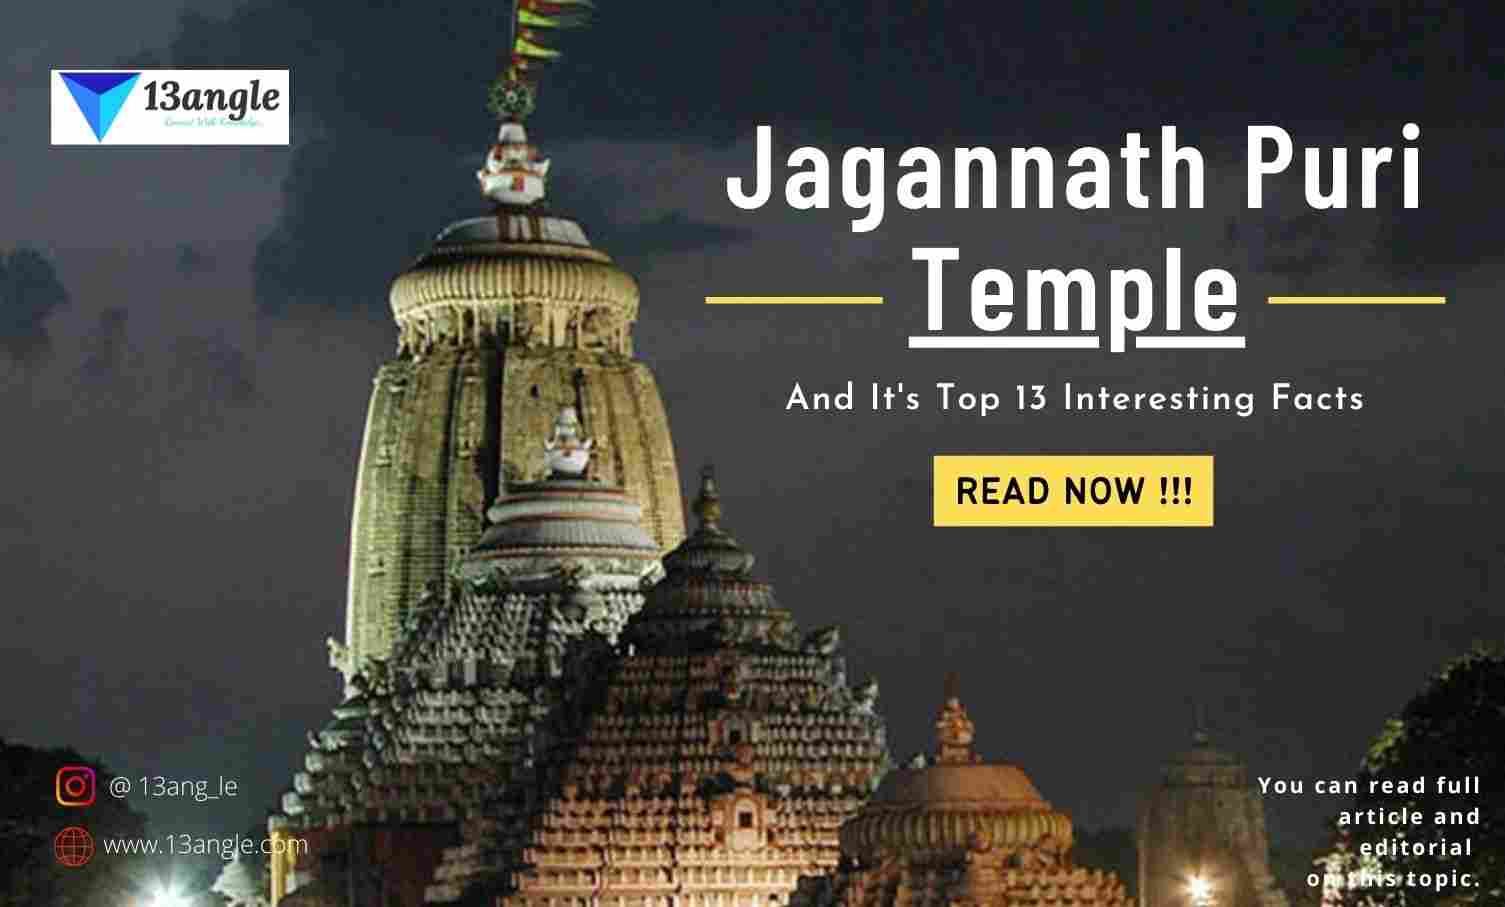 Jagannath Puri Temple And It's Top 13 Interesting Facts- 13angle.com